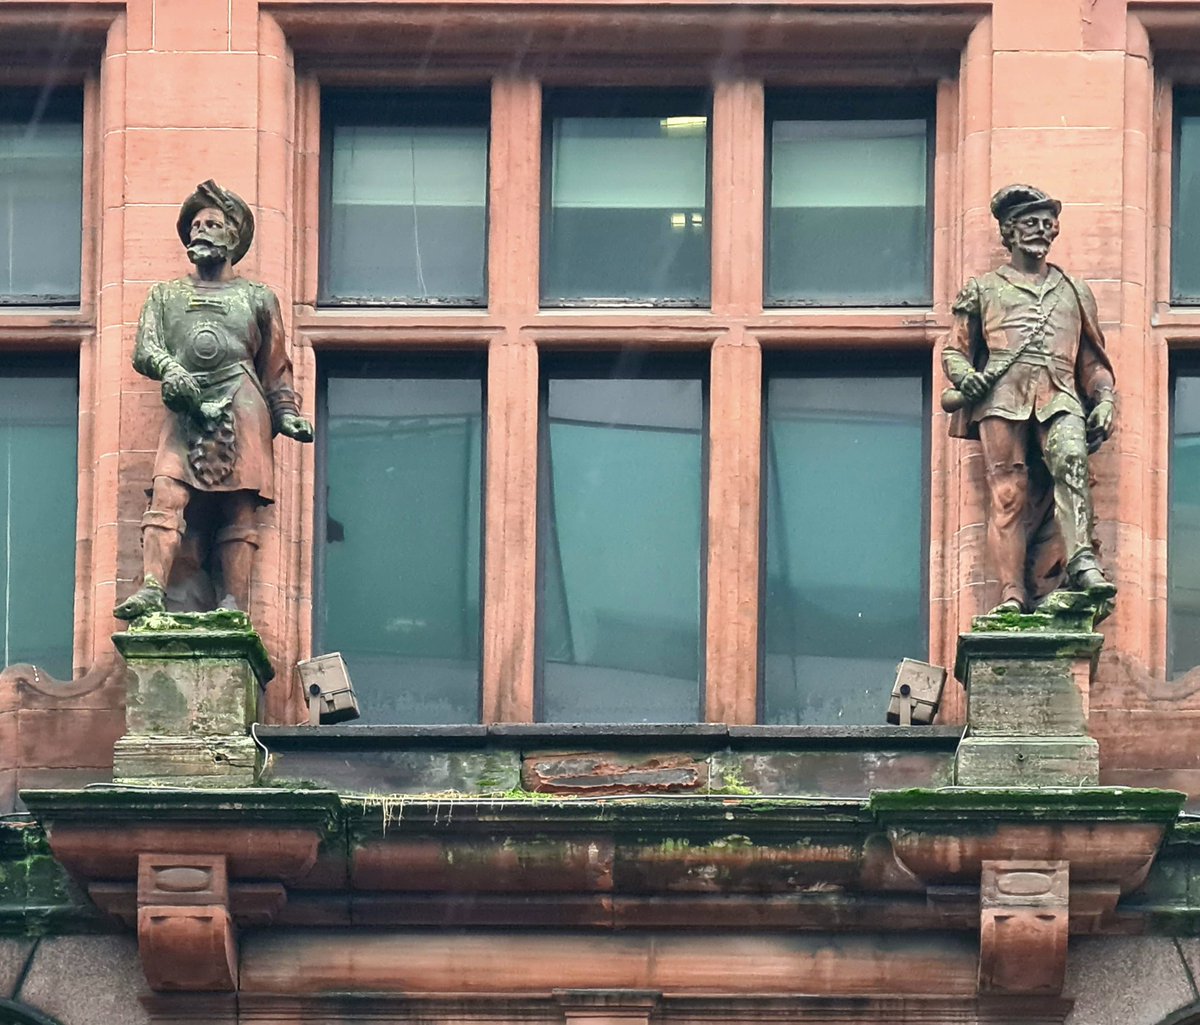 These two statues above the entrance to Distiller's House on Waterloo Street in Glasgow are clearly don't like each other very much. 

Cont./

#glasgow #sculpture #architecture #glasgowbuildings #sirwalterscott
#theladyofthelake